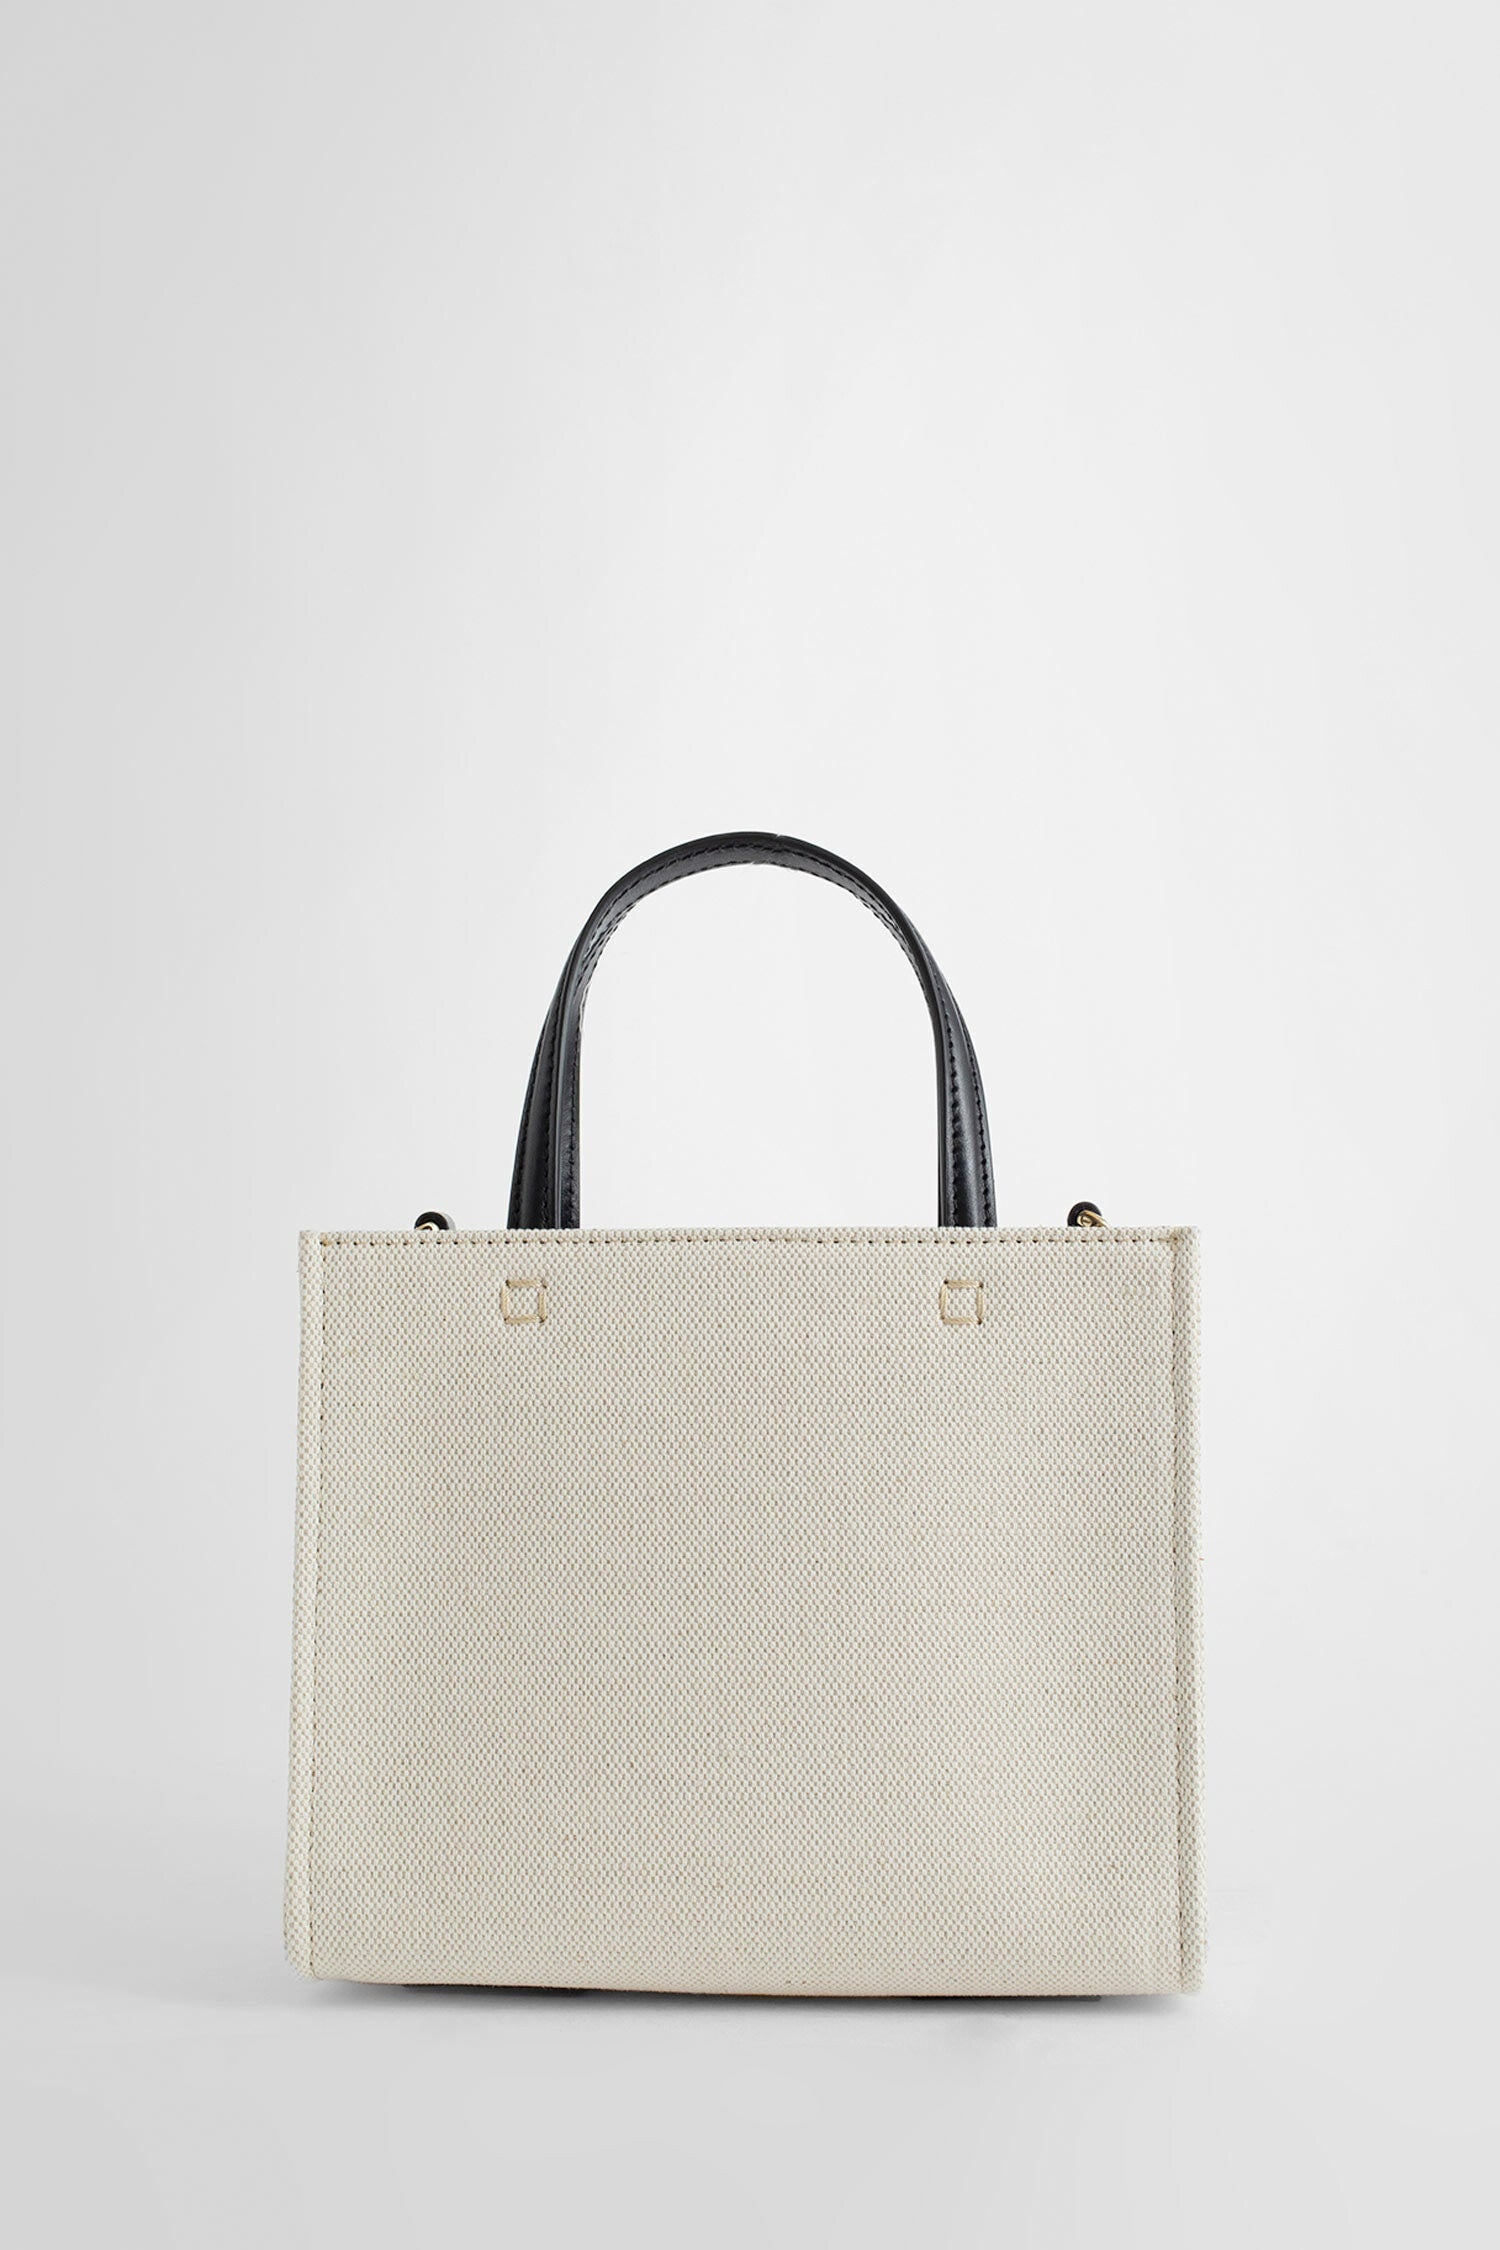 GIVENCHY WOMAN BEIGE TOTE BAGS - 3